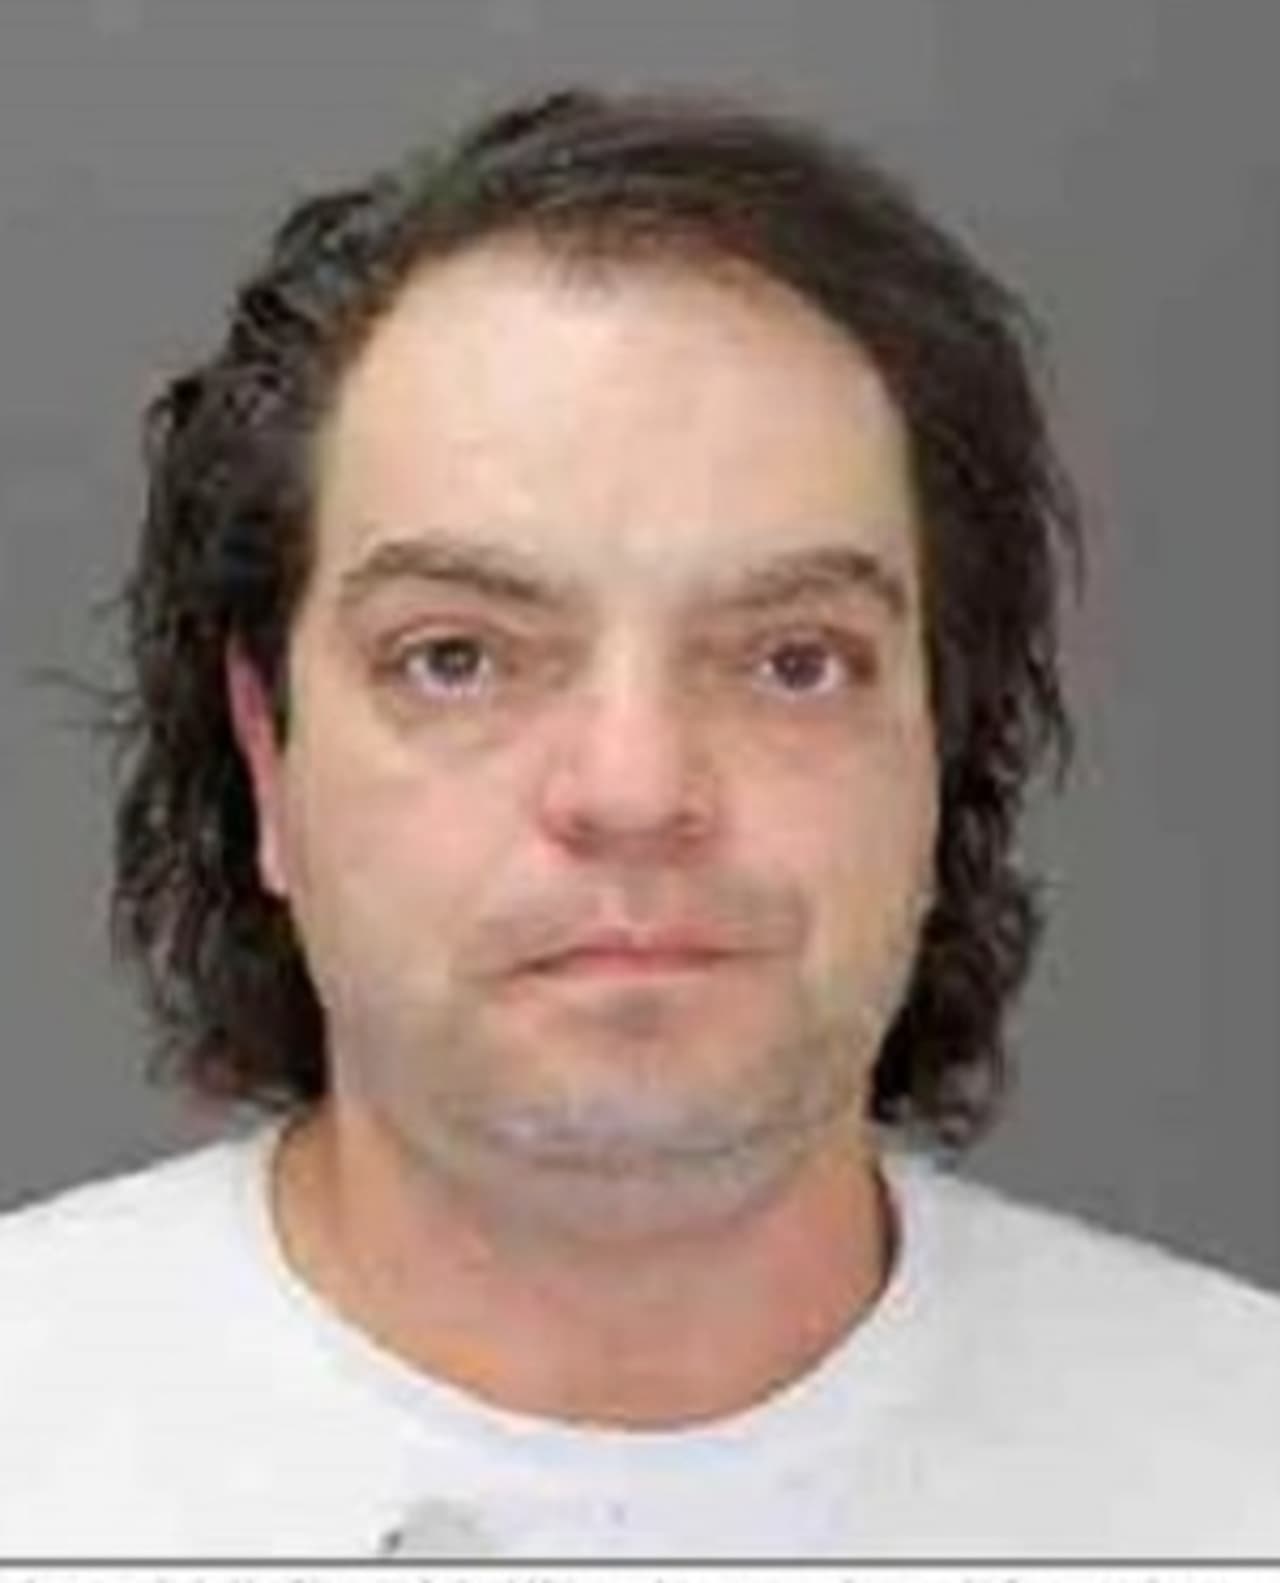 Nicola Mancino, 45, is wanted by Ramapo police on charges of driving while under the influence of drugs and alcohol.